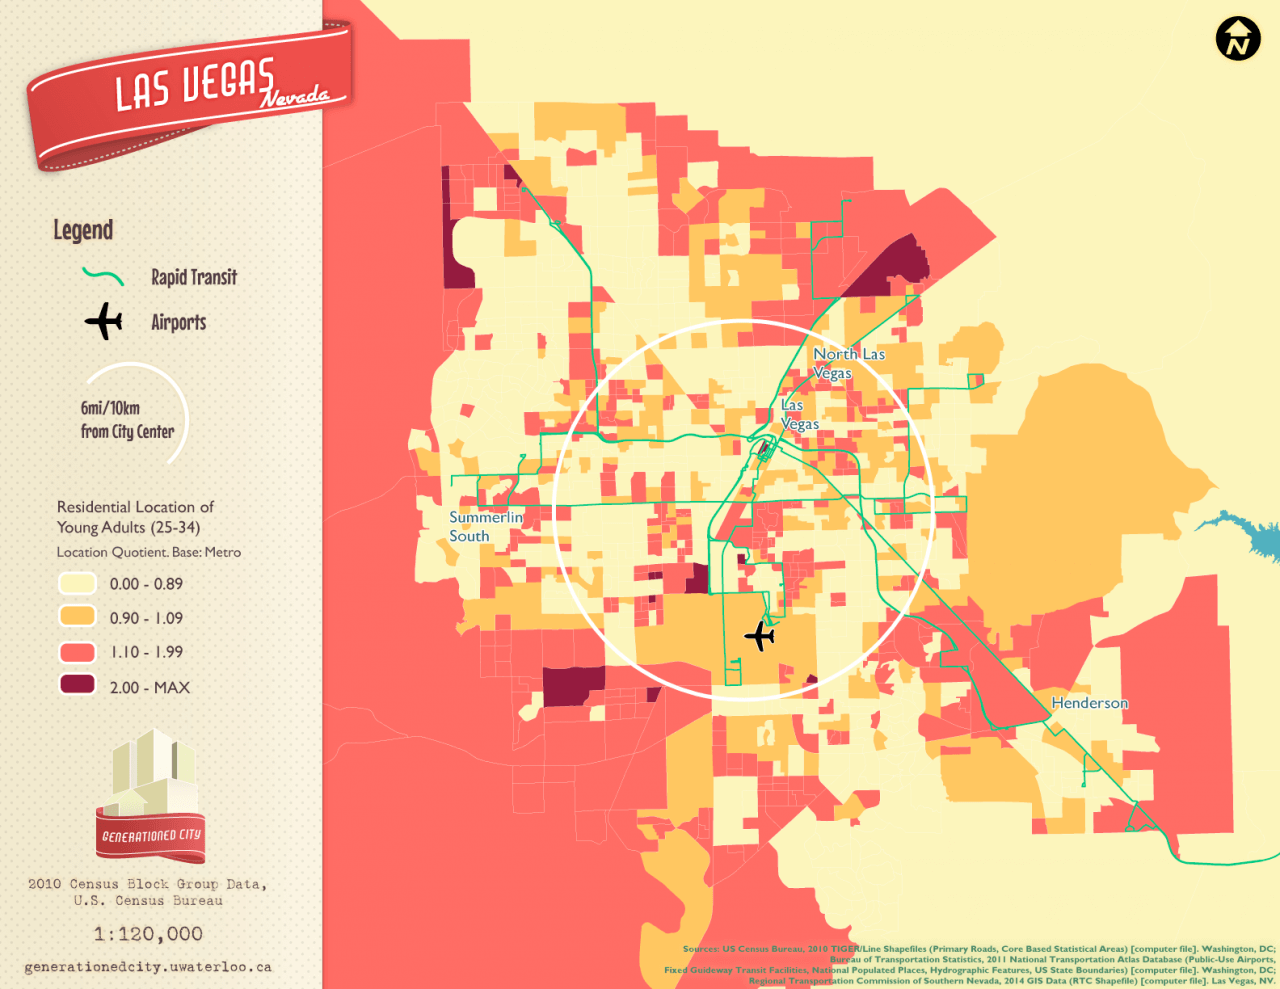 Residential location of young adults in Las Vegas.